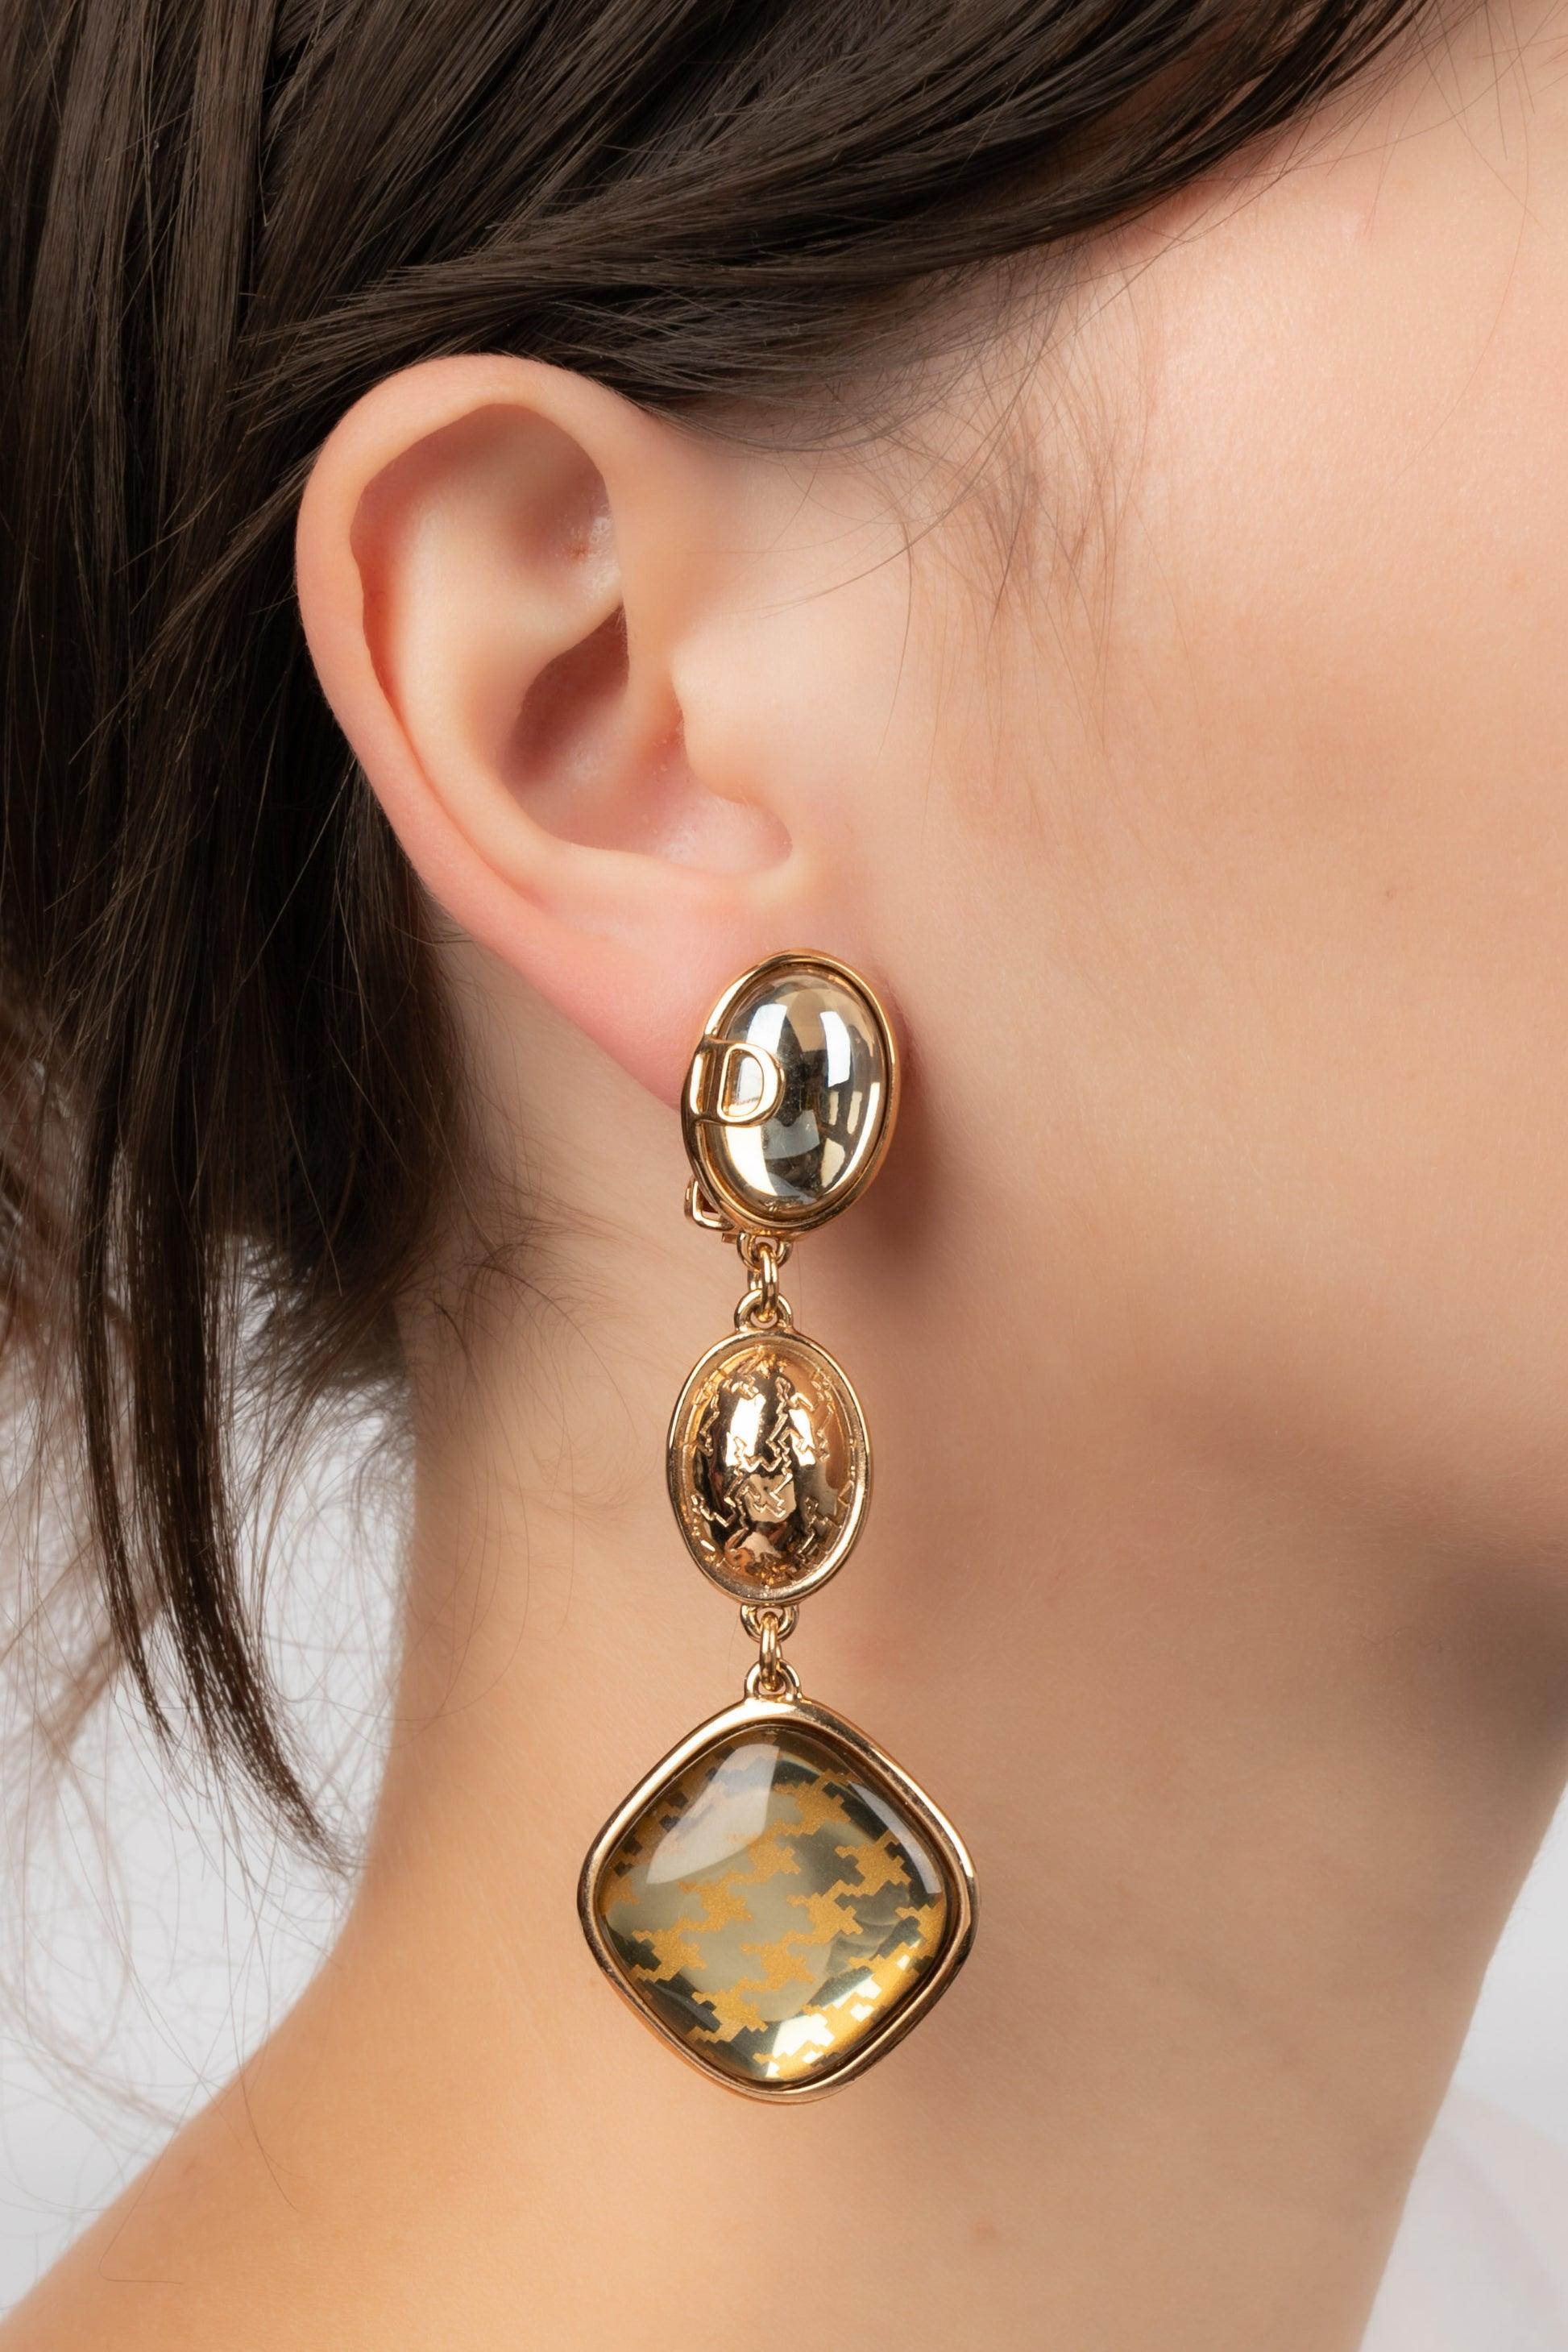 Christian Dior Golden Metal Clip-on Earrings with Resin and Glass Cabochons For Sale 3